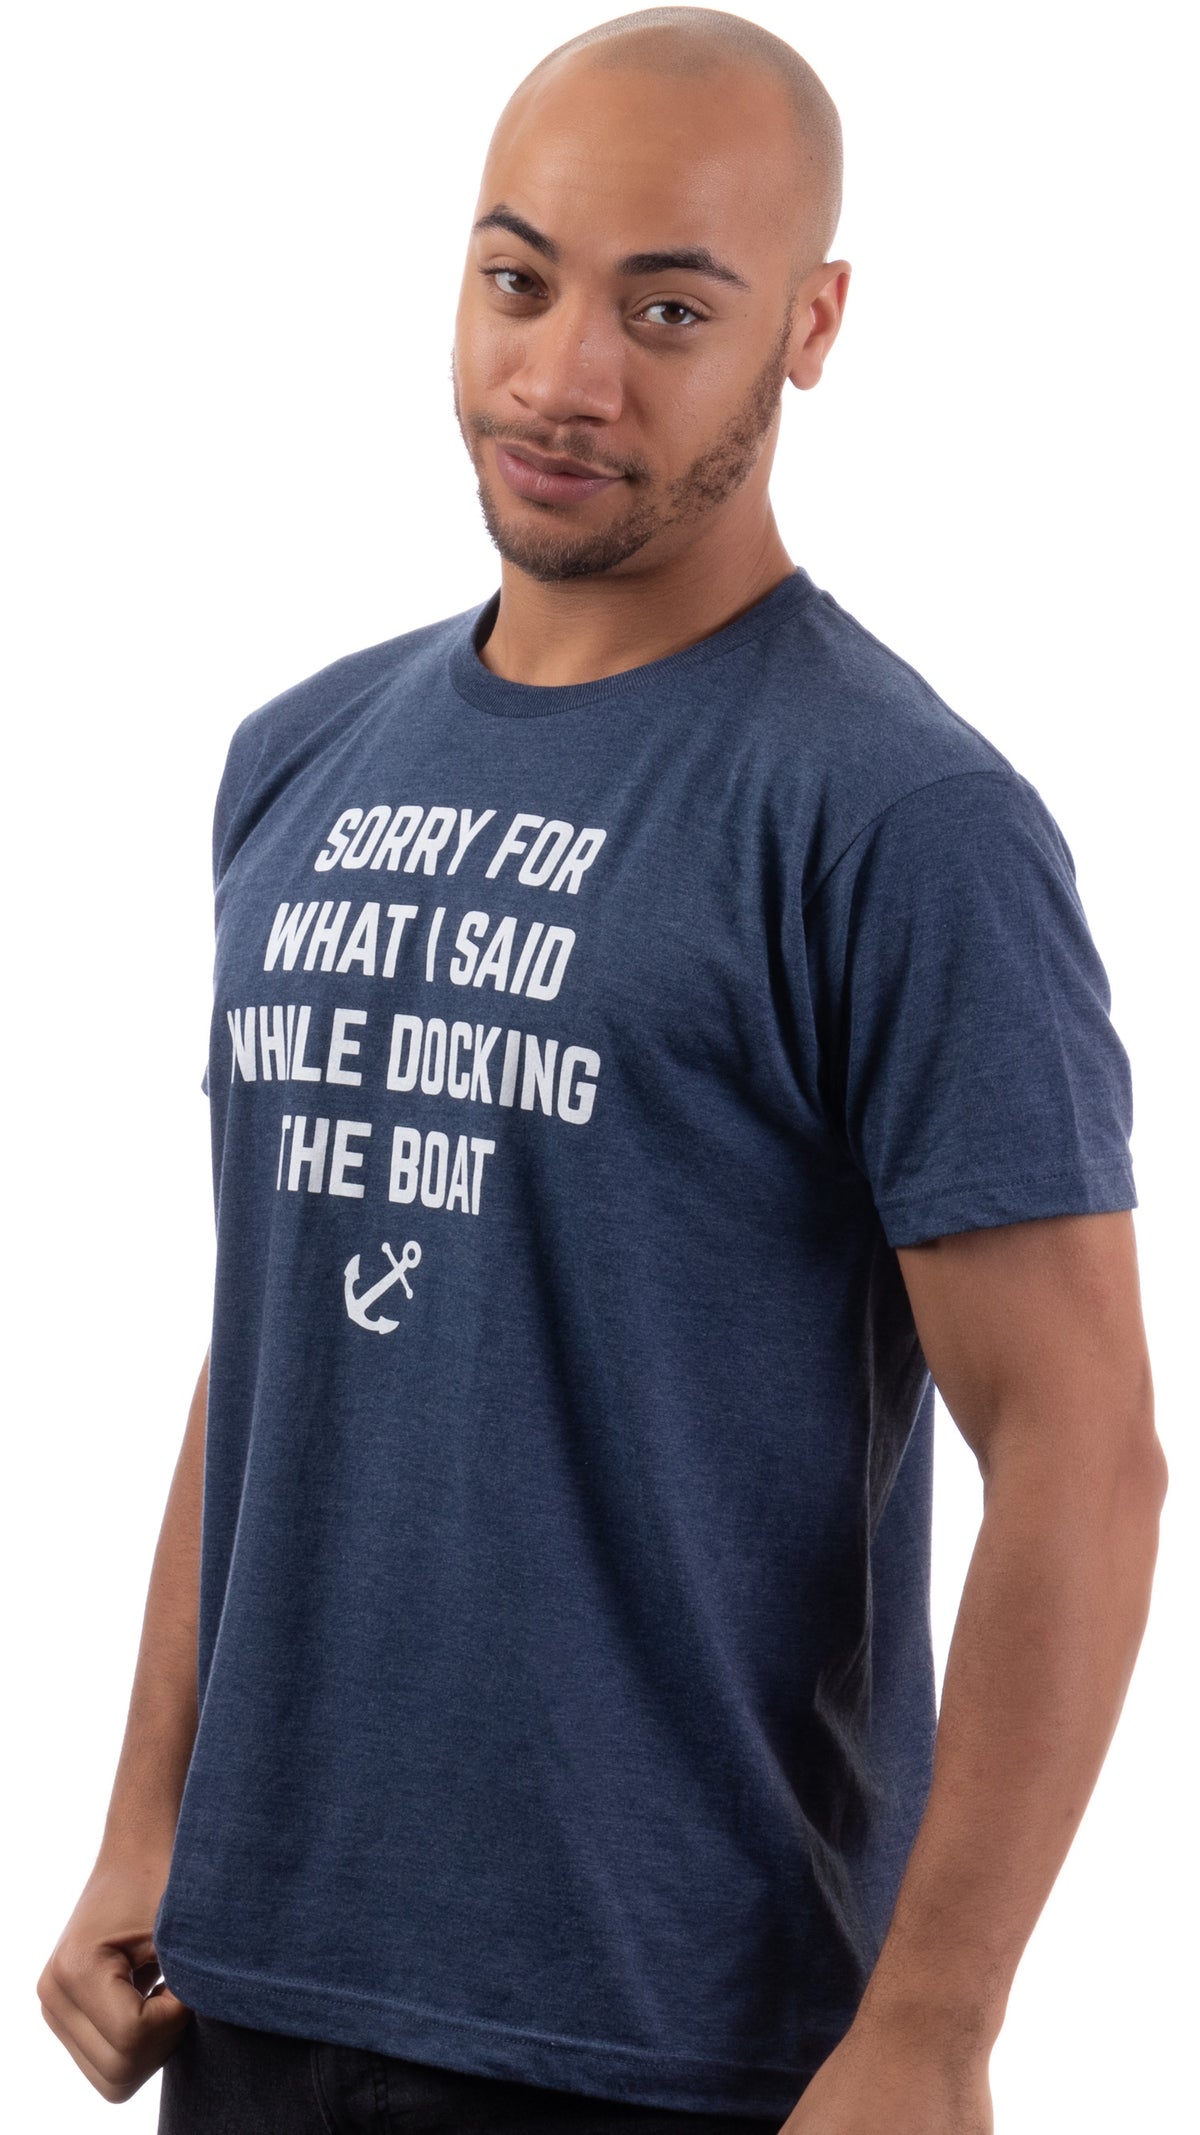 Sorry for what I Said while Docking the Boat - Funny Boating Boater T-shirt